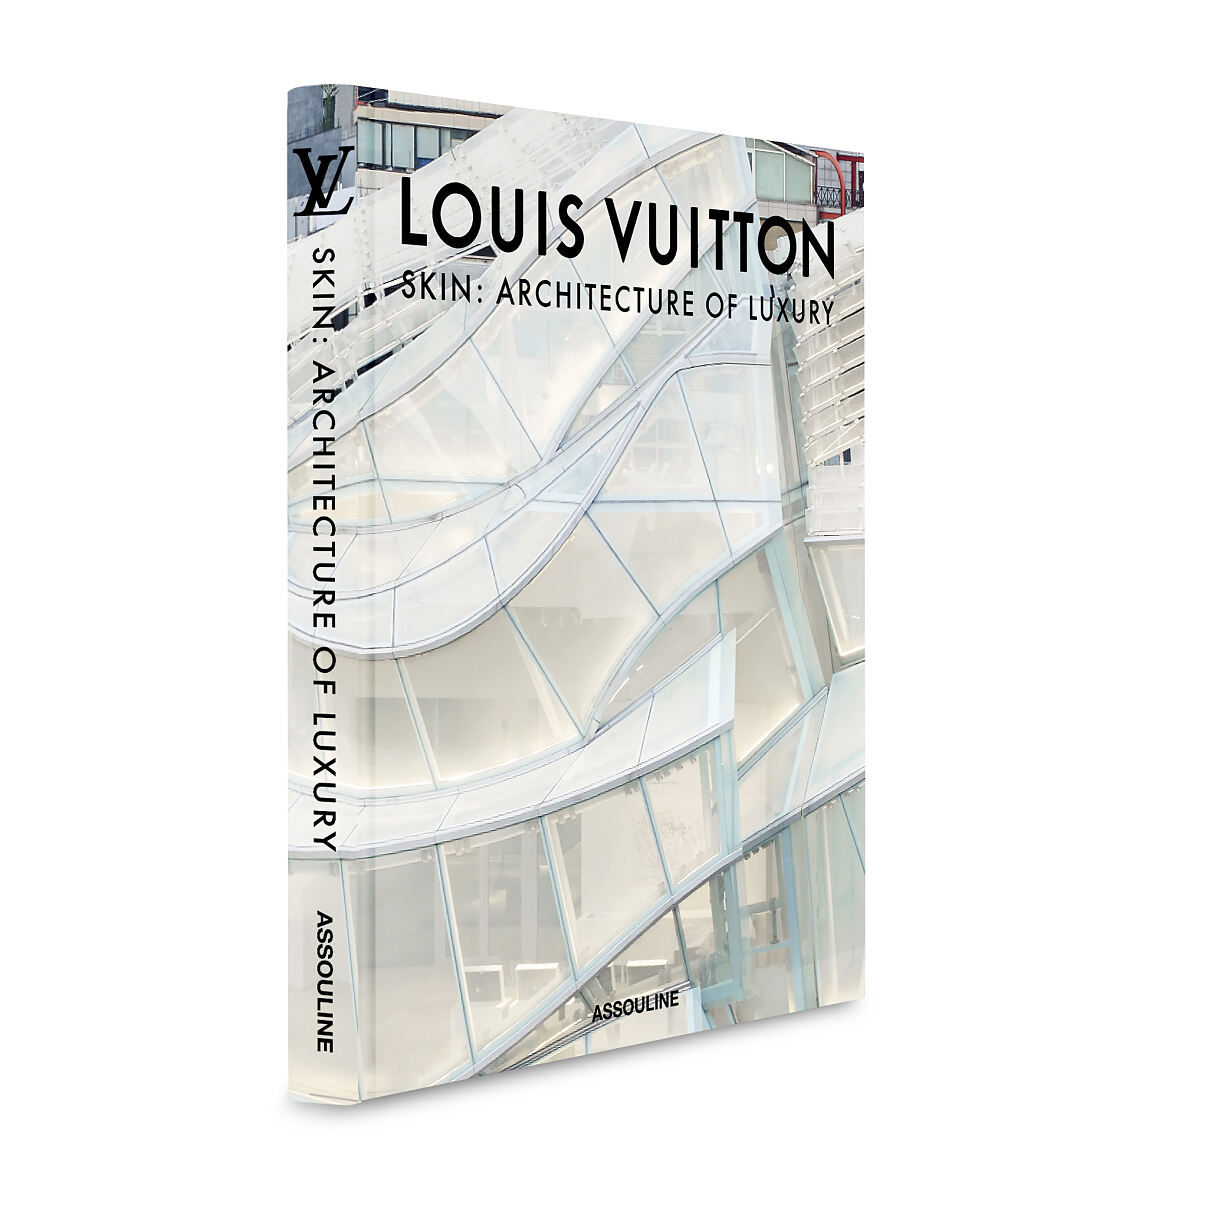 LV_Louis Vuitton Skin - The Architecture of Luxury_Cover (6)